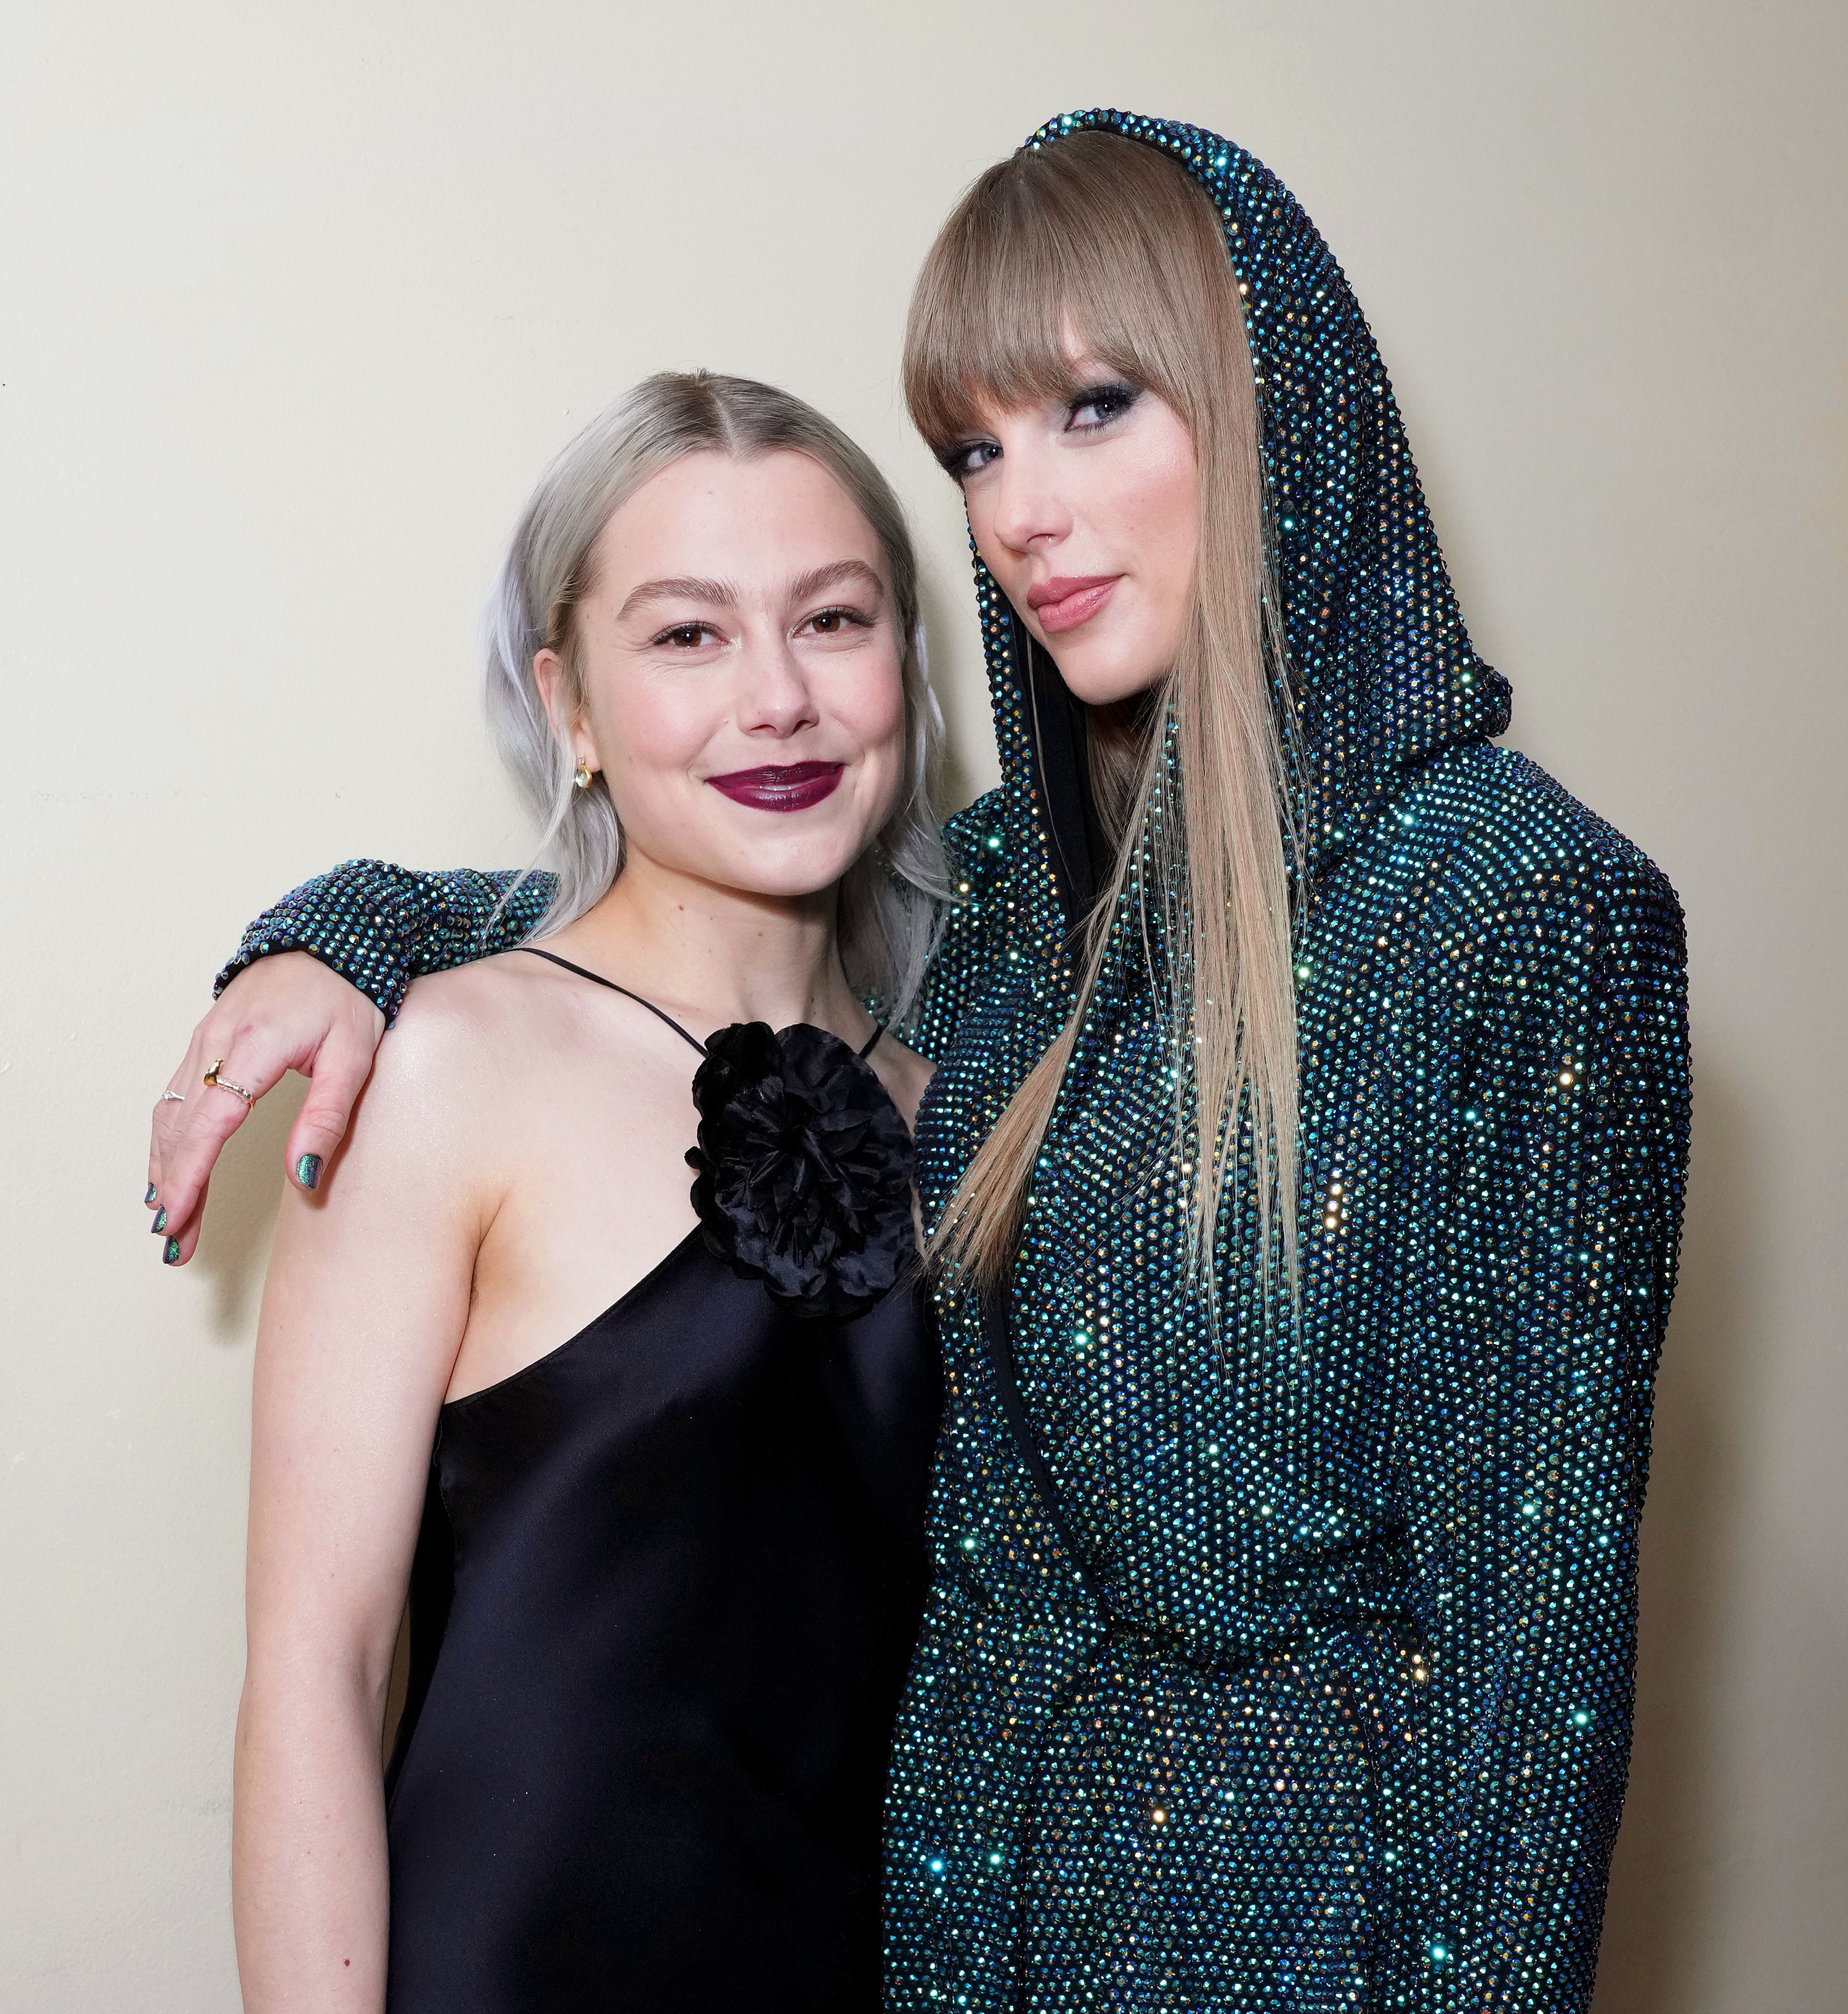 Taylor and Phoebe